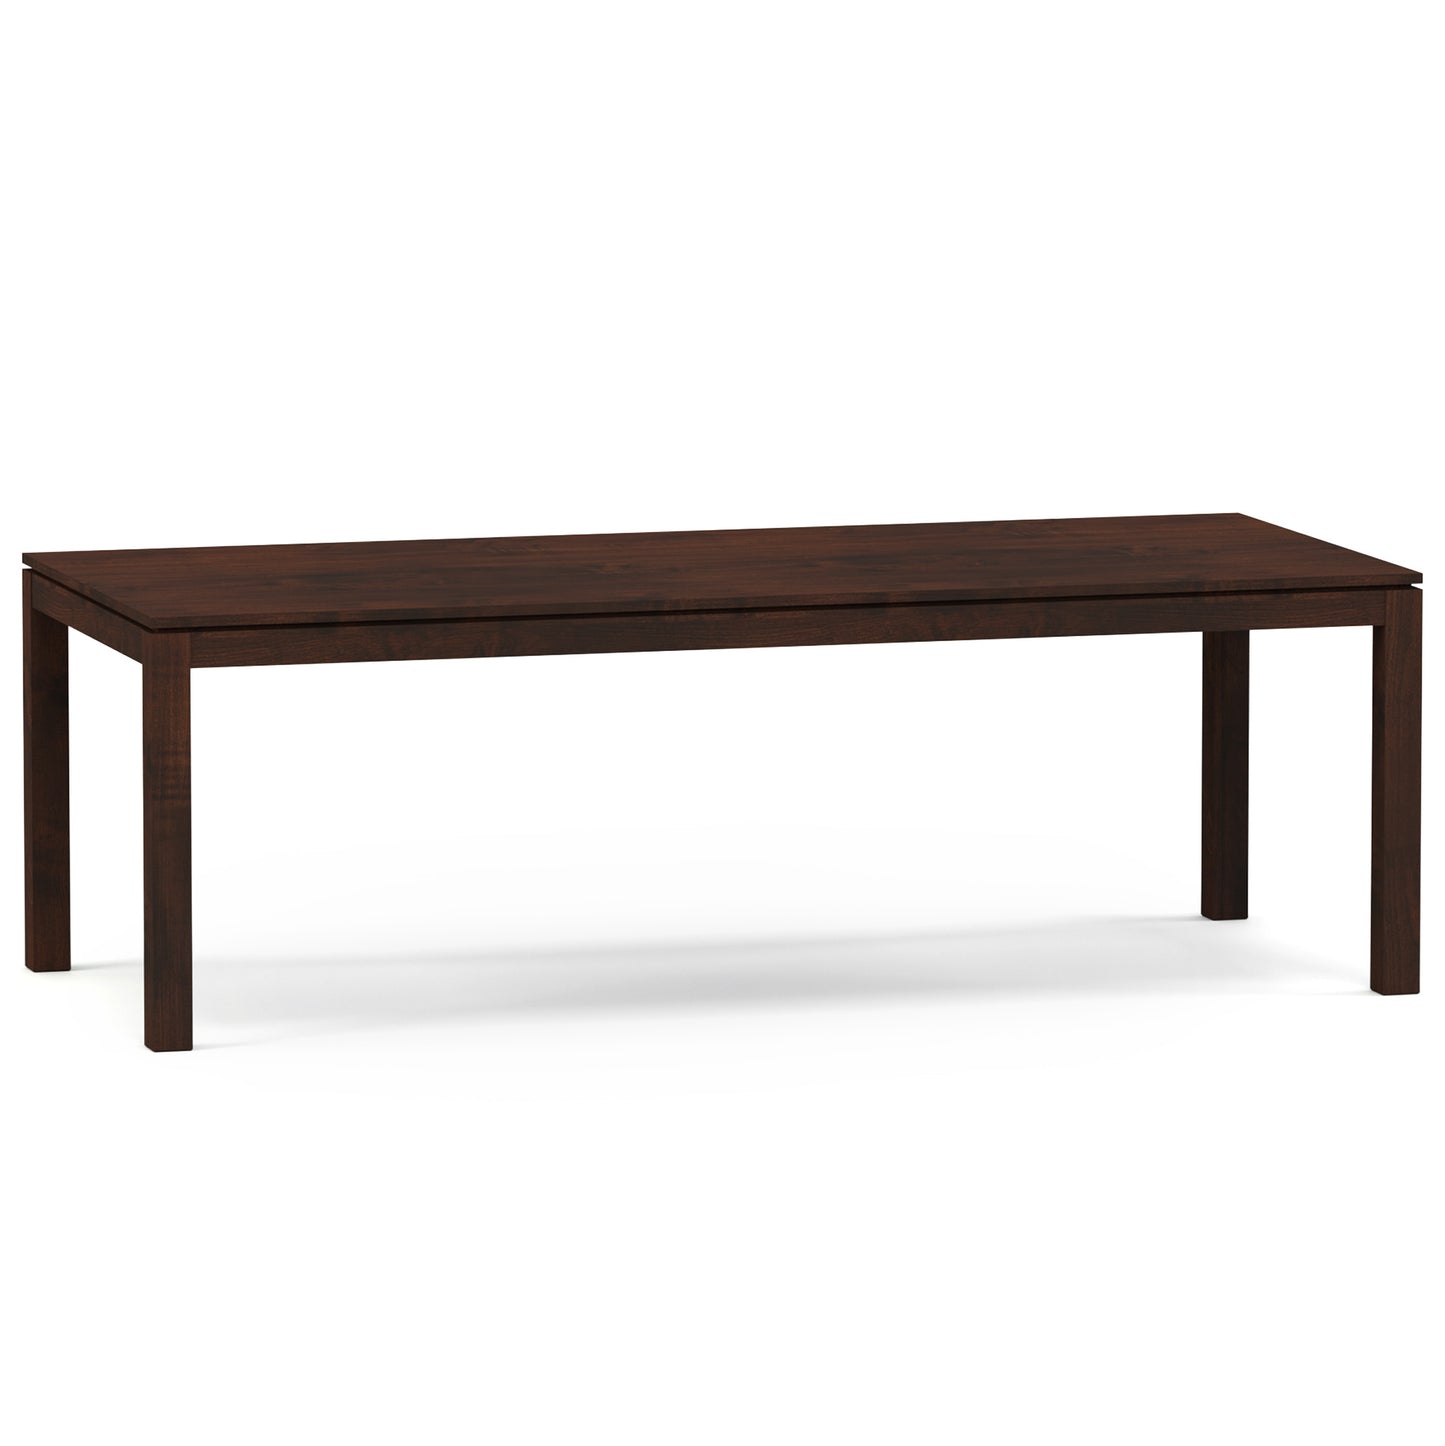 Dwyer 92-inch Dining Table - Stickley Furniture | Mattress